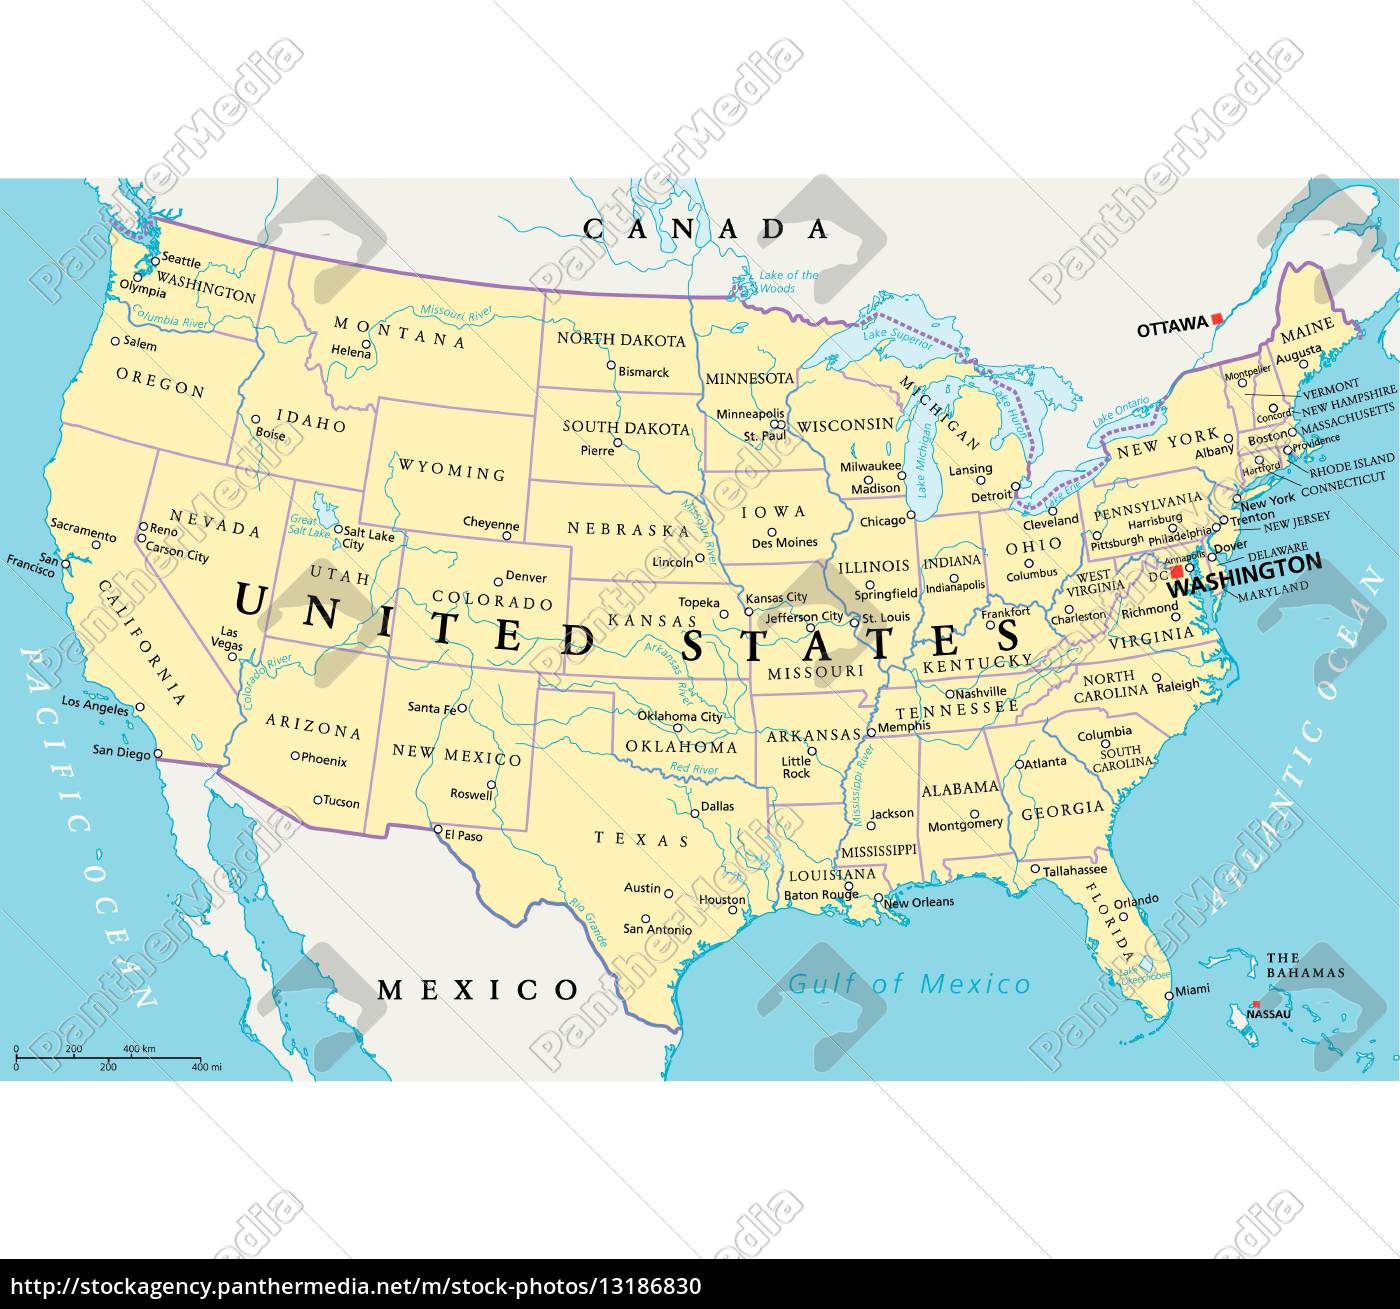 United States Of America Political Map Royalty Free Image